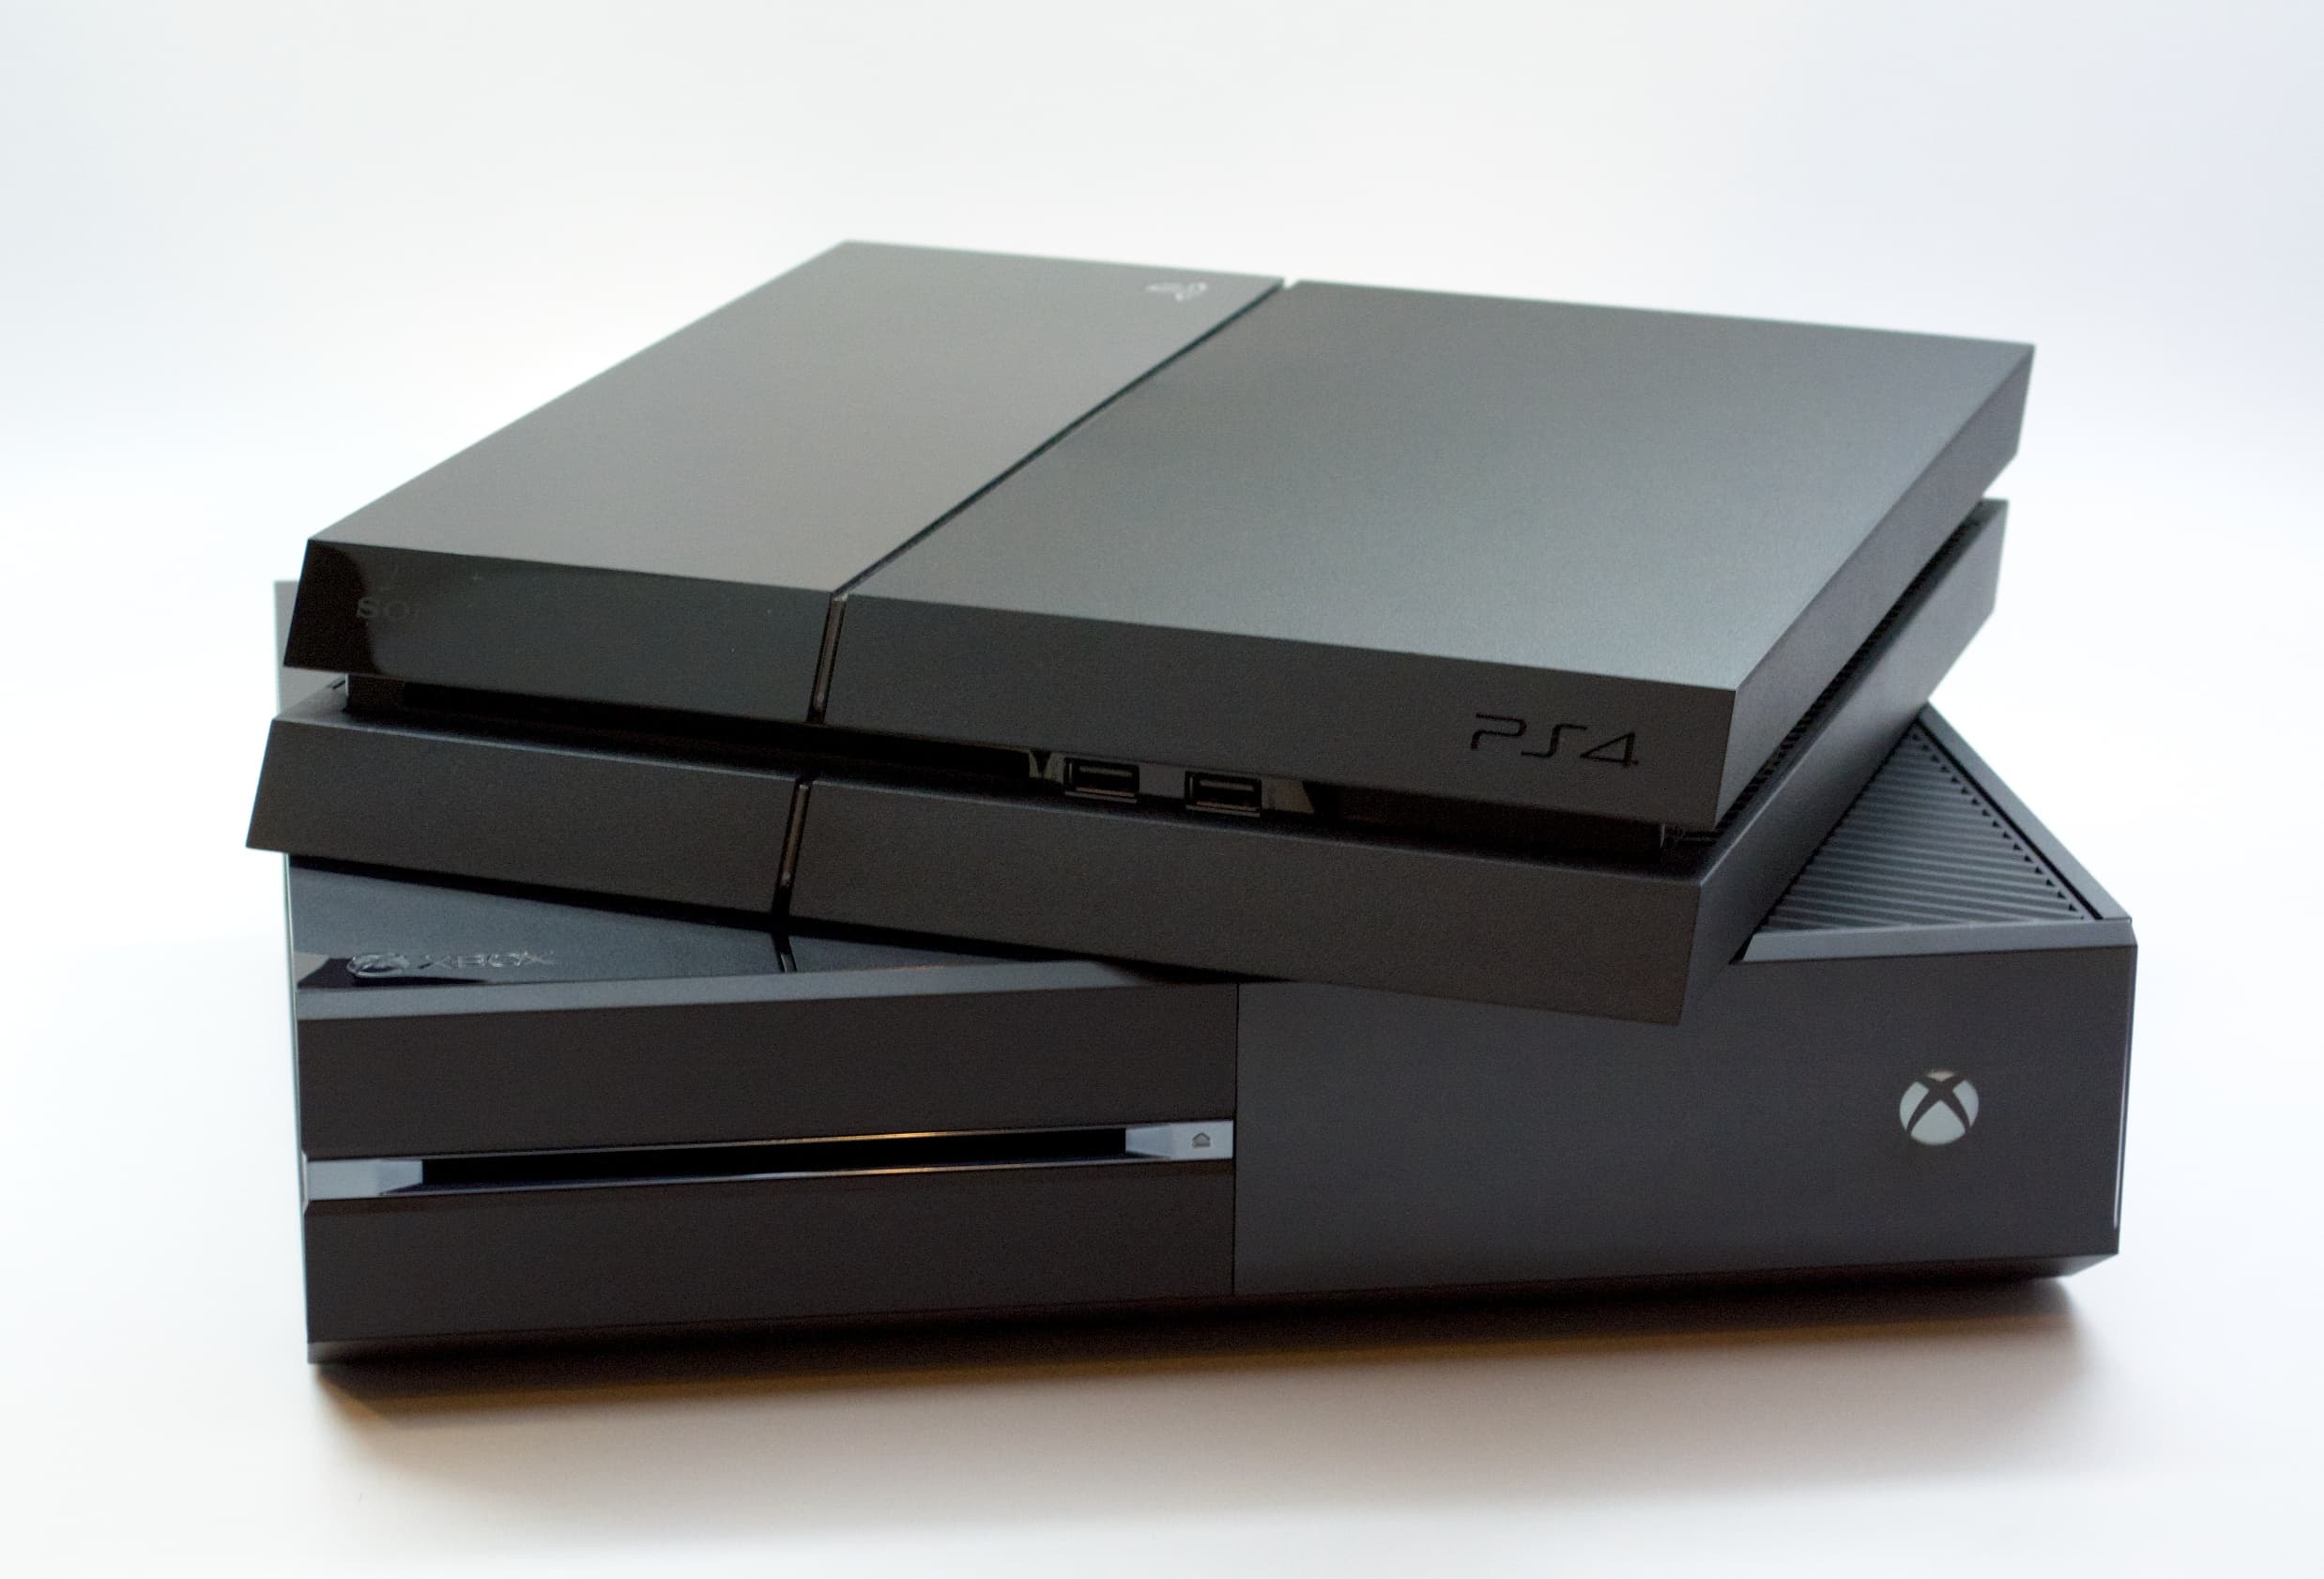 Xbox vs playstation 4. Ps4 Xbox one. PLAYSTATION ps4. Пс4 Xbox one s.. Хбокс оне и плейстейшен 4.